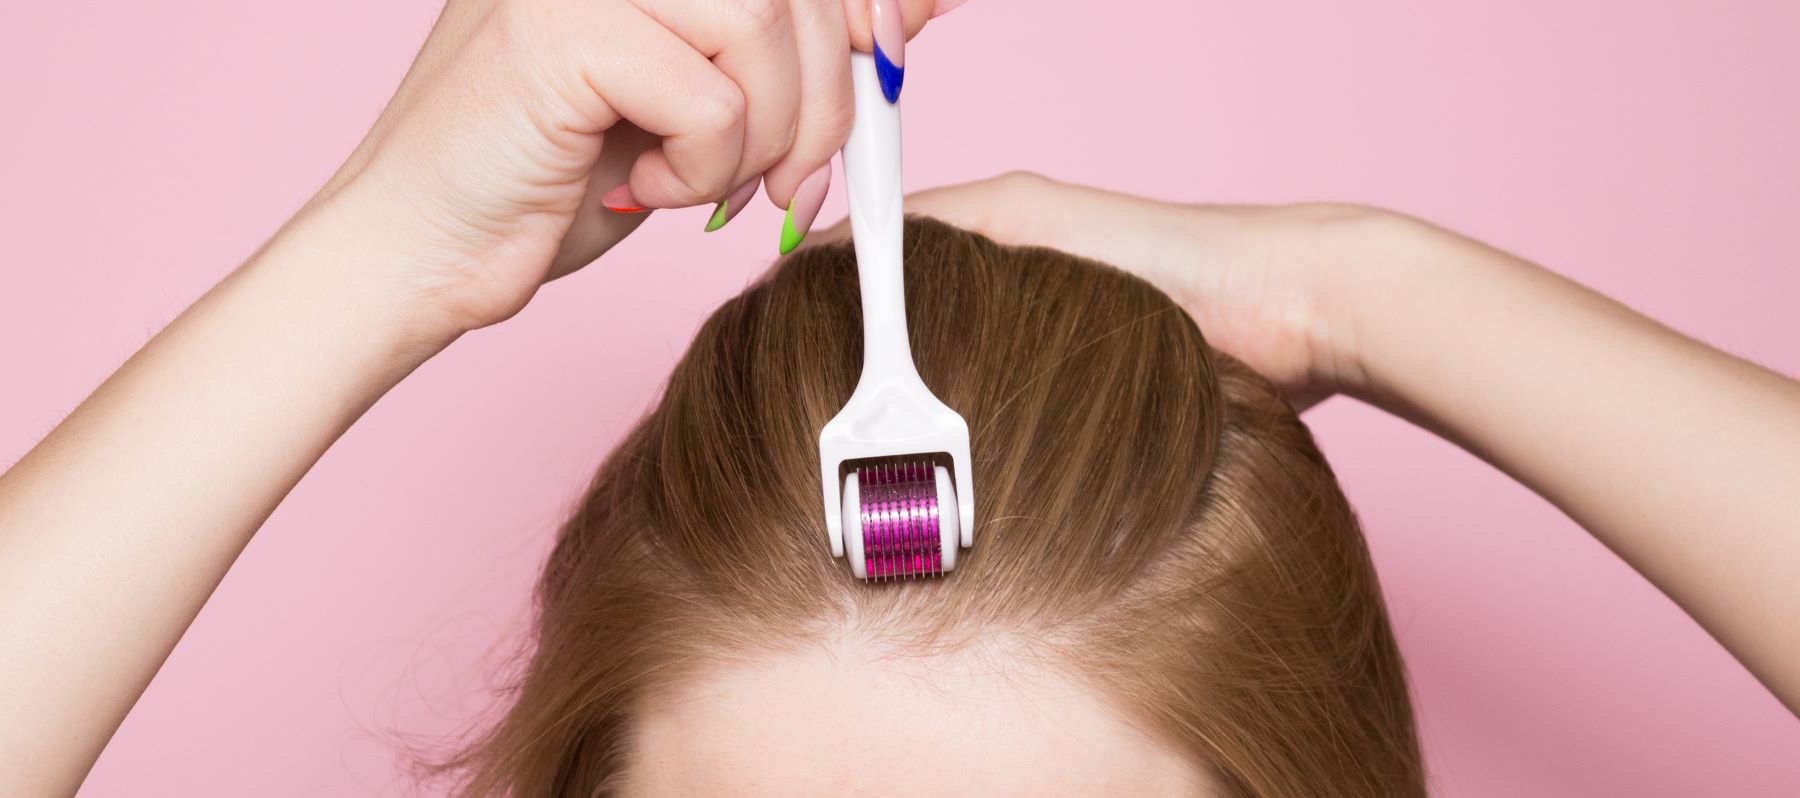 Woman using a derma roller on her scalp